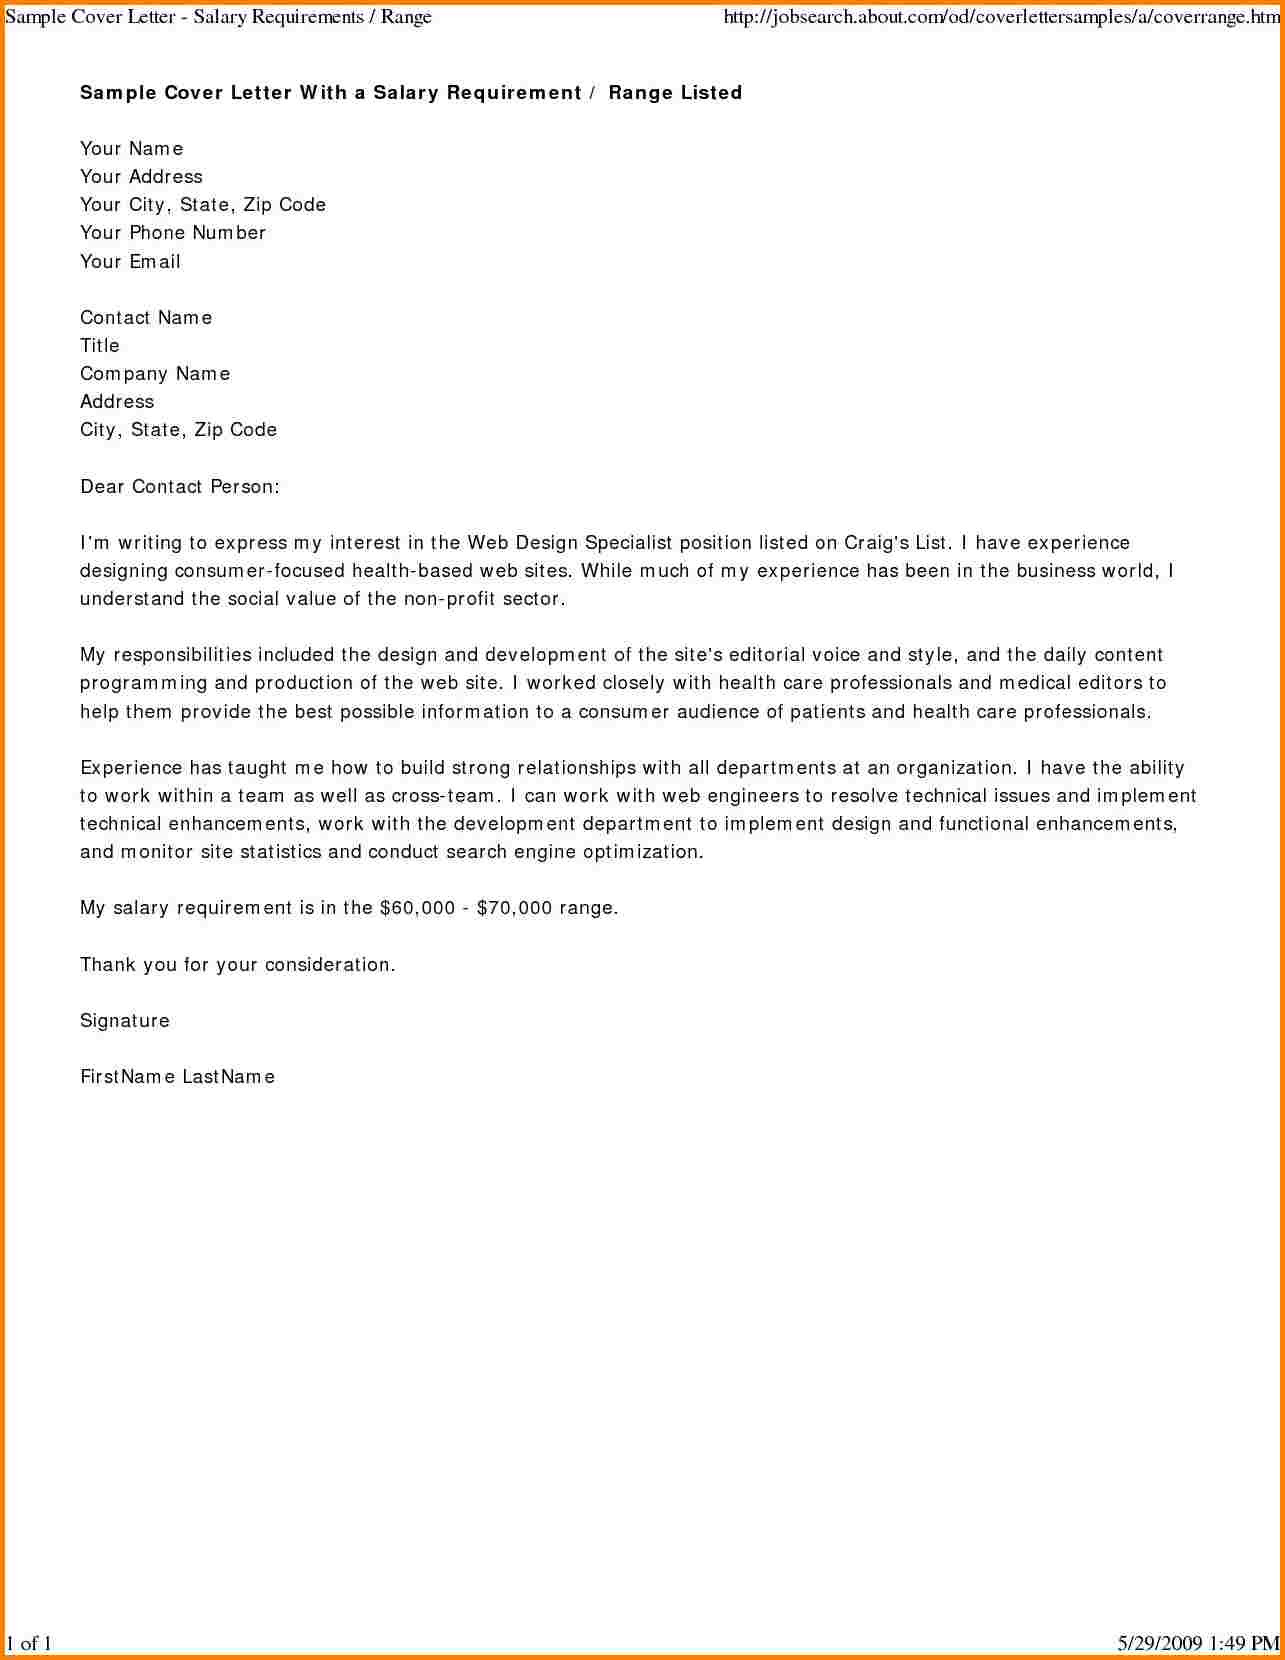 Vacation Request Letter Template - Sample Email Request for Invoice Best 11 Salary Request Letter